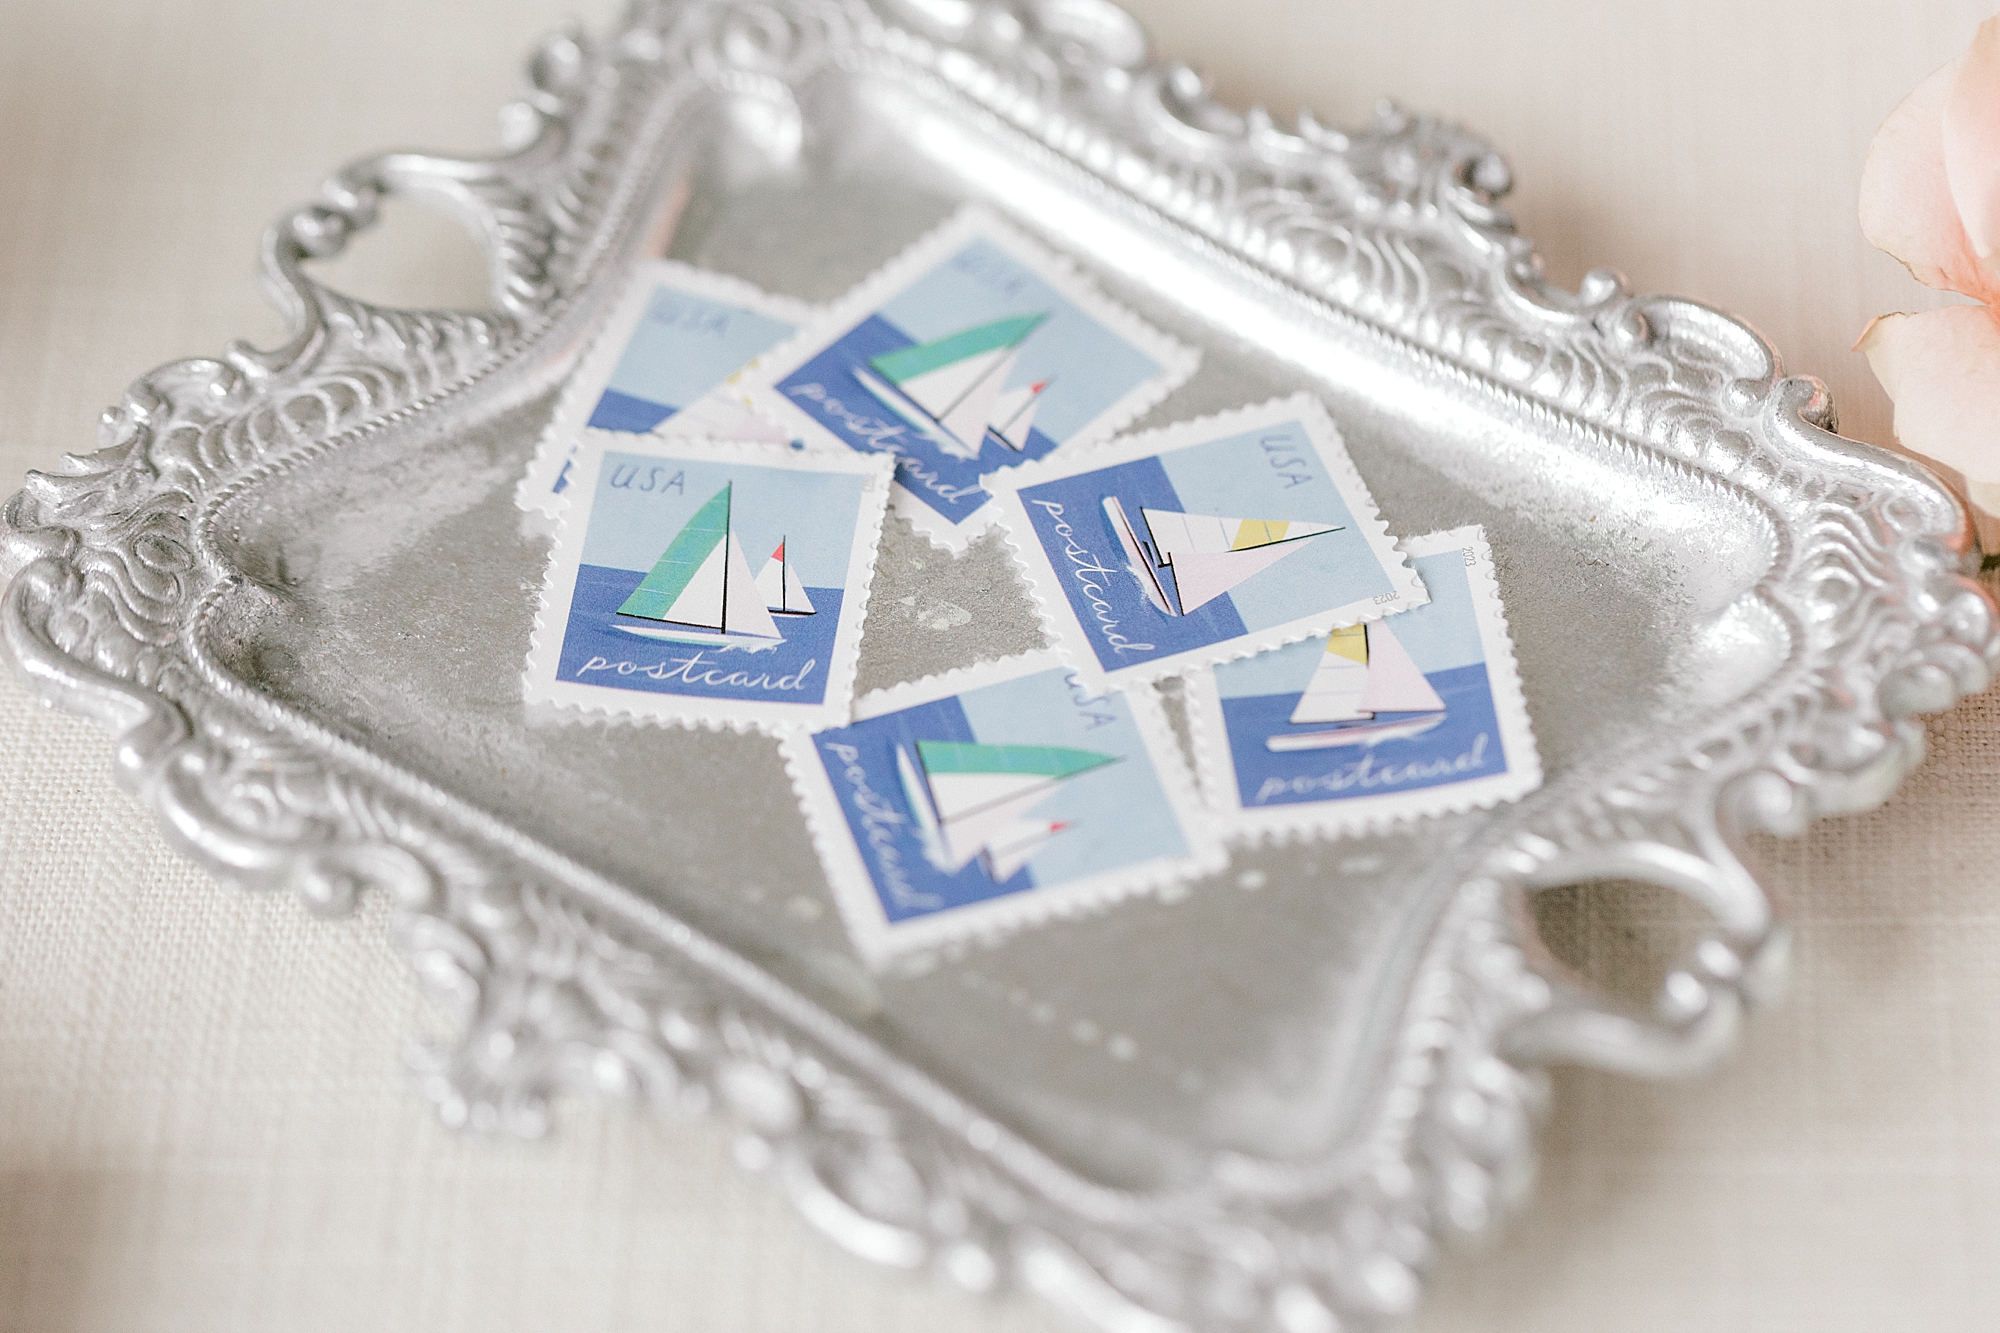 sailboat stamps lay on silver tray for coastal inspired wedding at Bonnet Island Estate